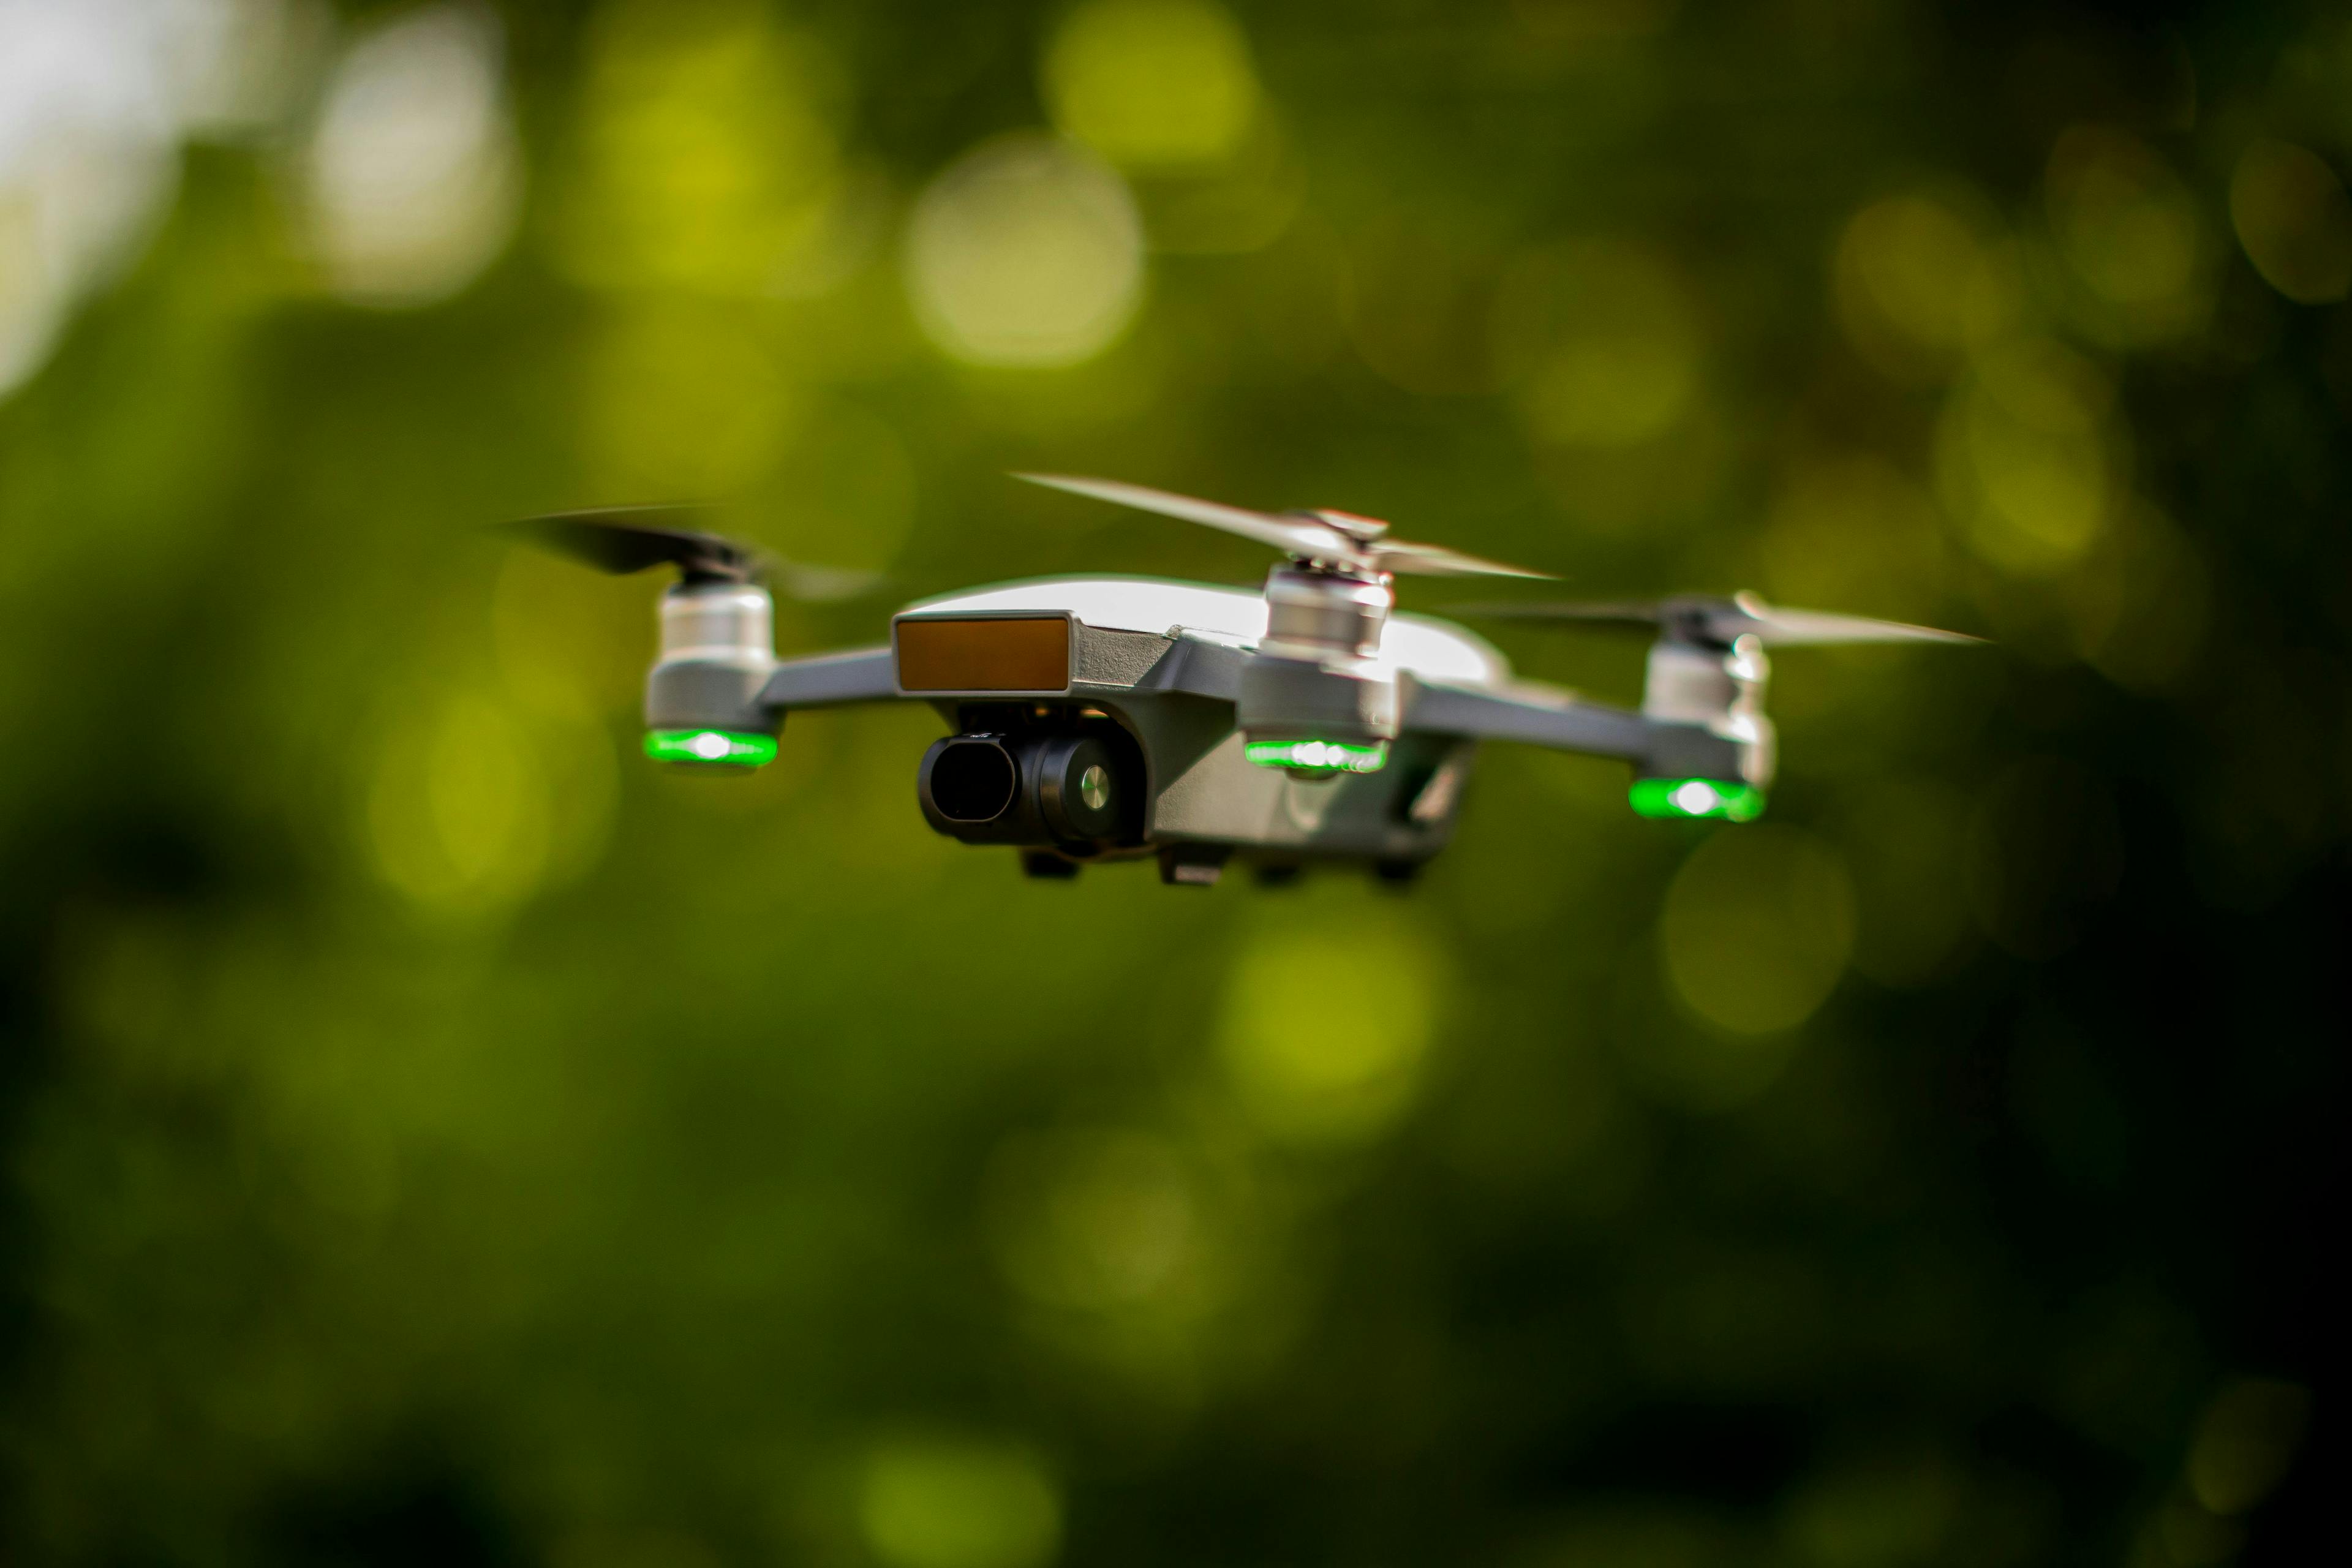 LetsQuip_Blog_drone_rental_required_licenses_to_rent_drone_2.jpg